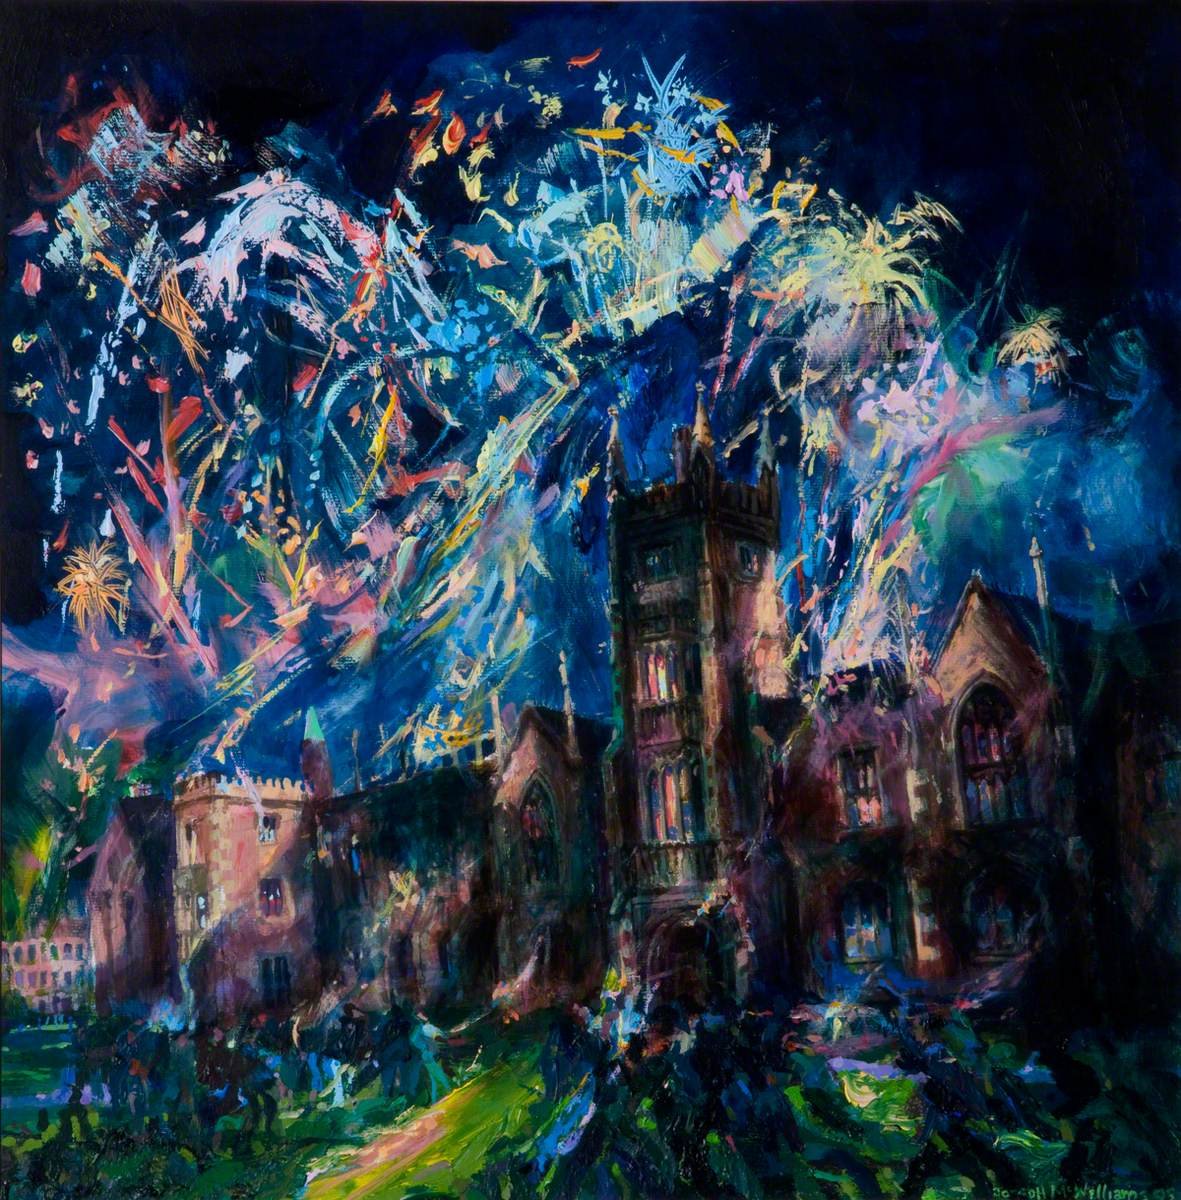 We do love getting involved with @artukdotorg #OnlineArtExchange. We chose 'Fireworks at Queen's Festival' in the collections of @NaughtonGallery for this week's theme - celebrating @NationalGallery’s Bicentenary #NG200 🎆🎆🎂🎇🎇